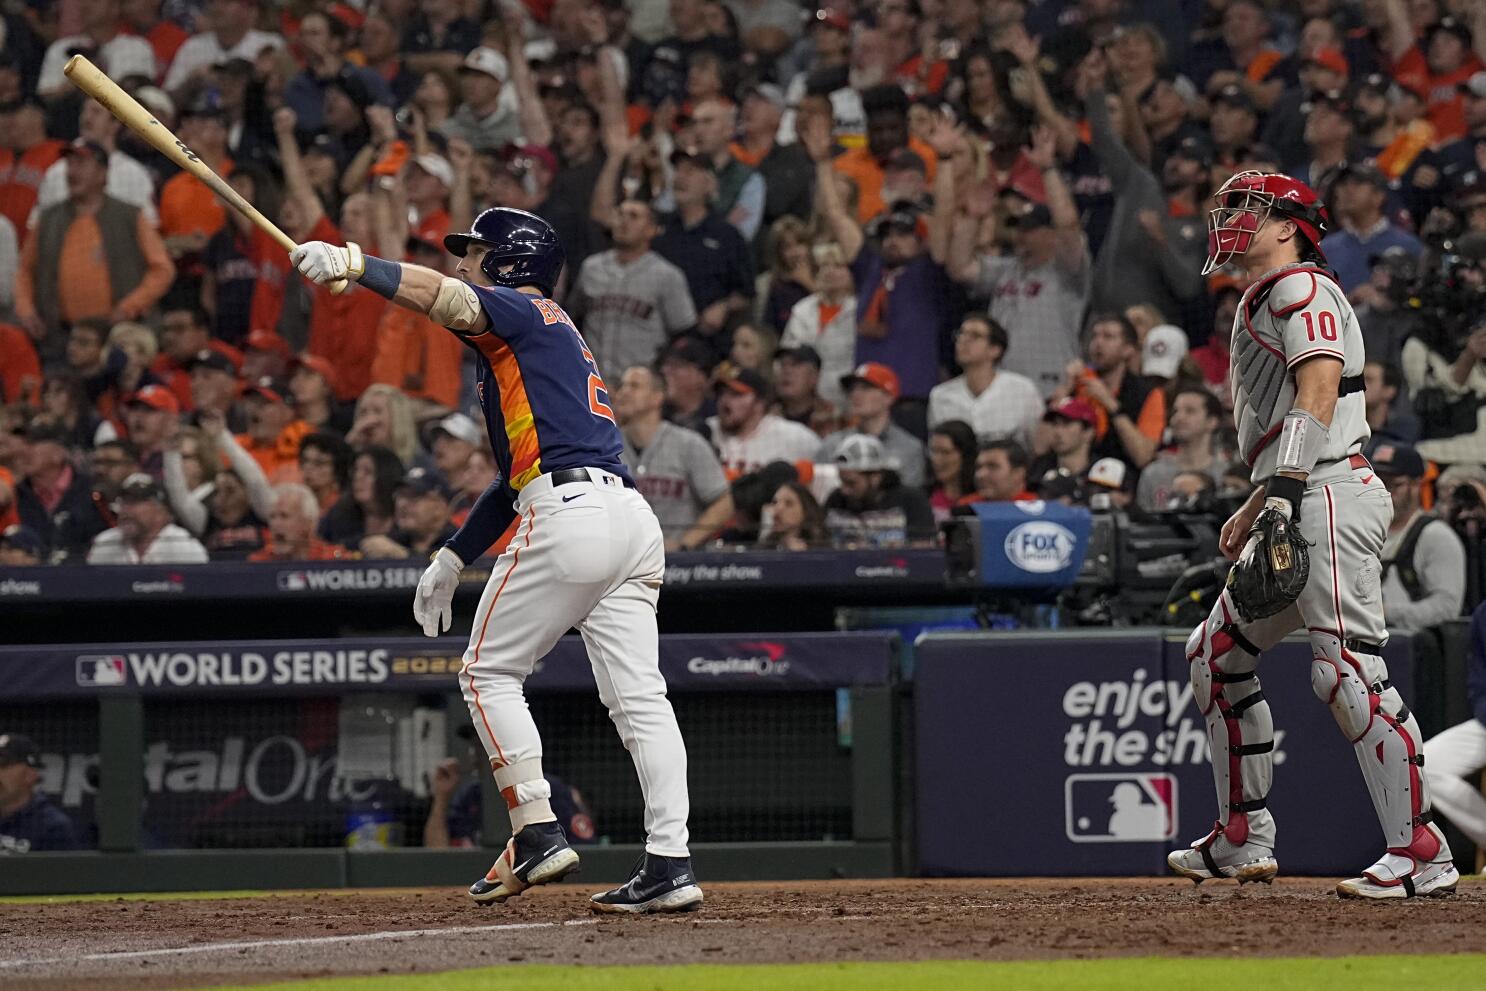 World Series: Framber Valdez, unsung Astros ace, puts Houston on his back  in Game 2 win over Phillies 